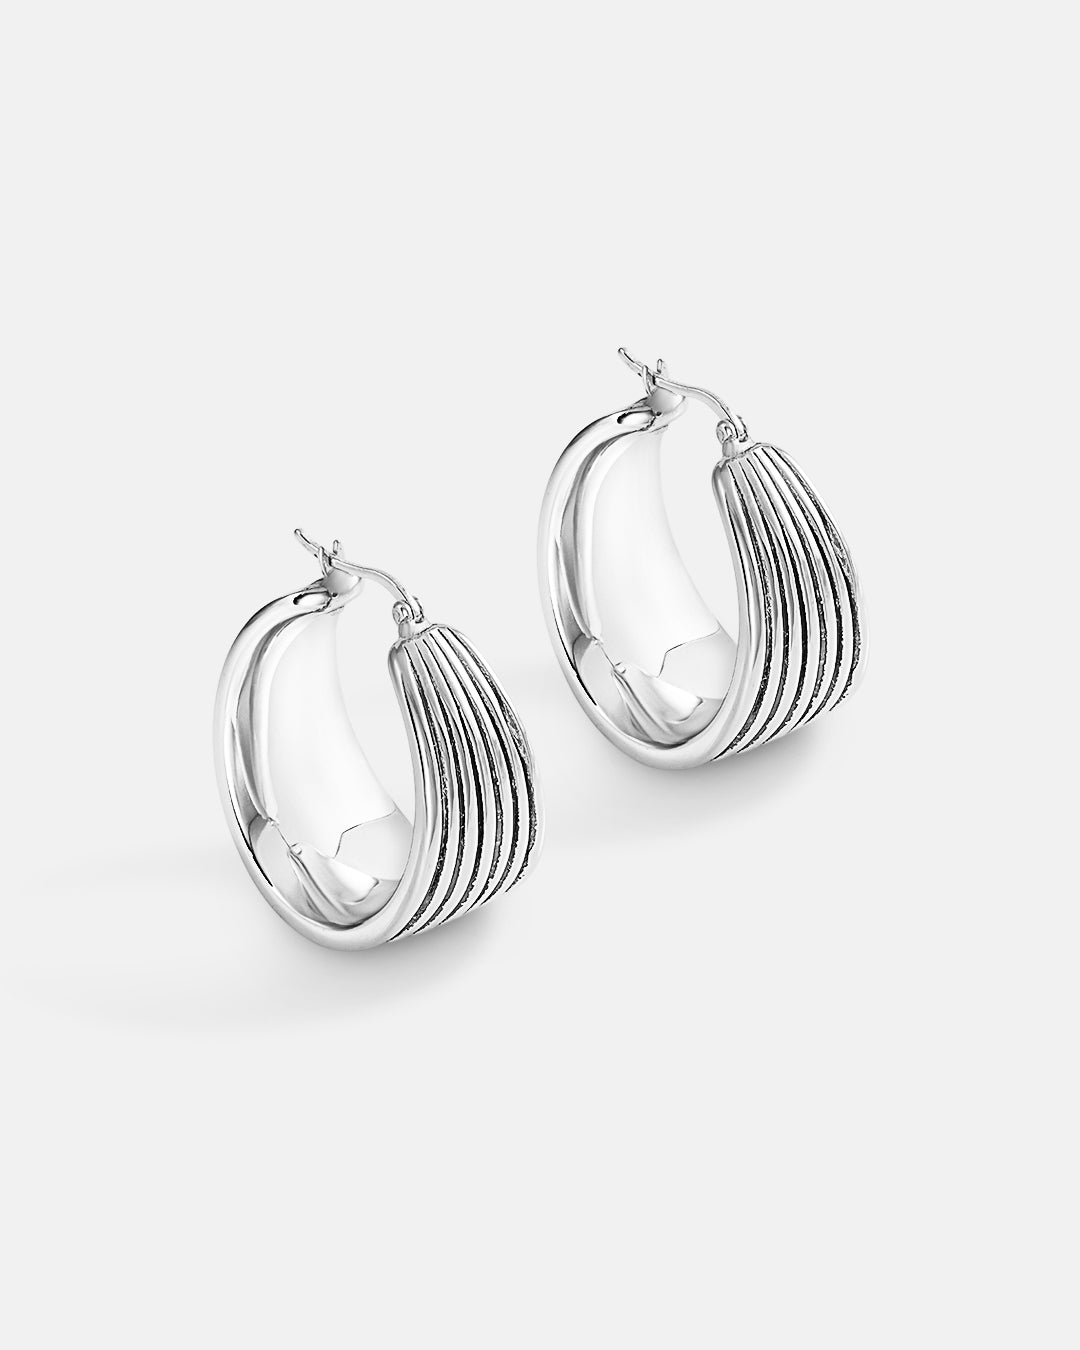 This is the product picture of chunky oxidized line pattern hoop earrings plated in white gold in sterling silver material